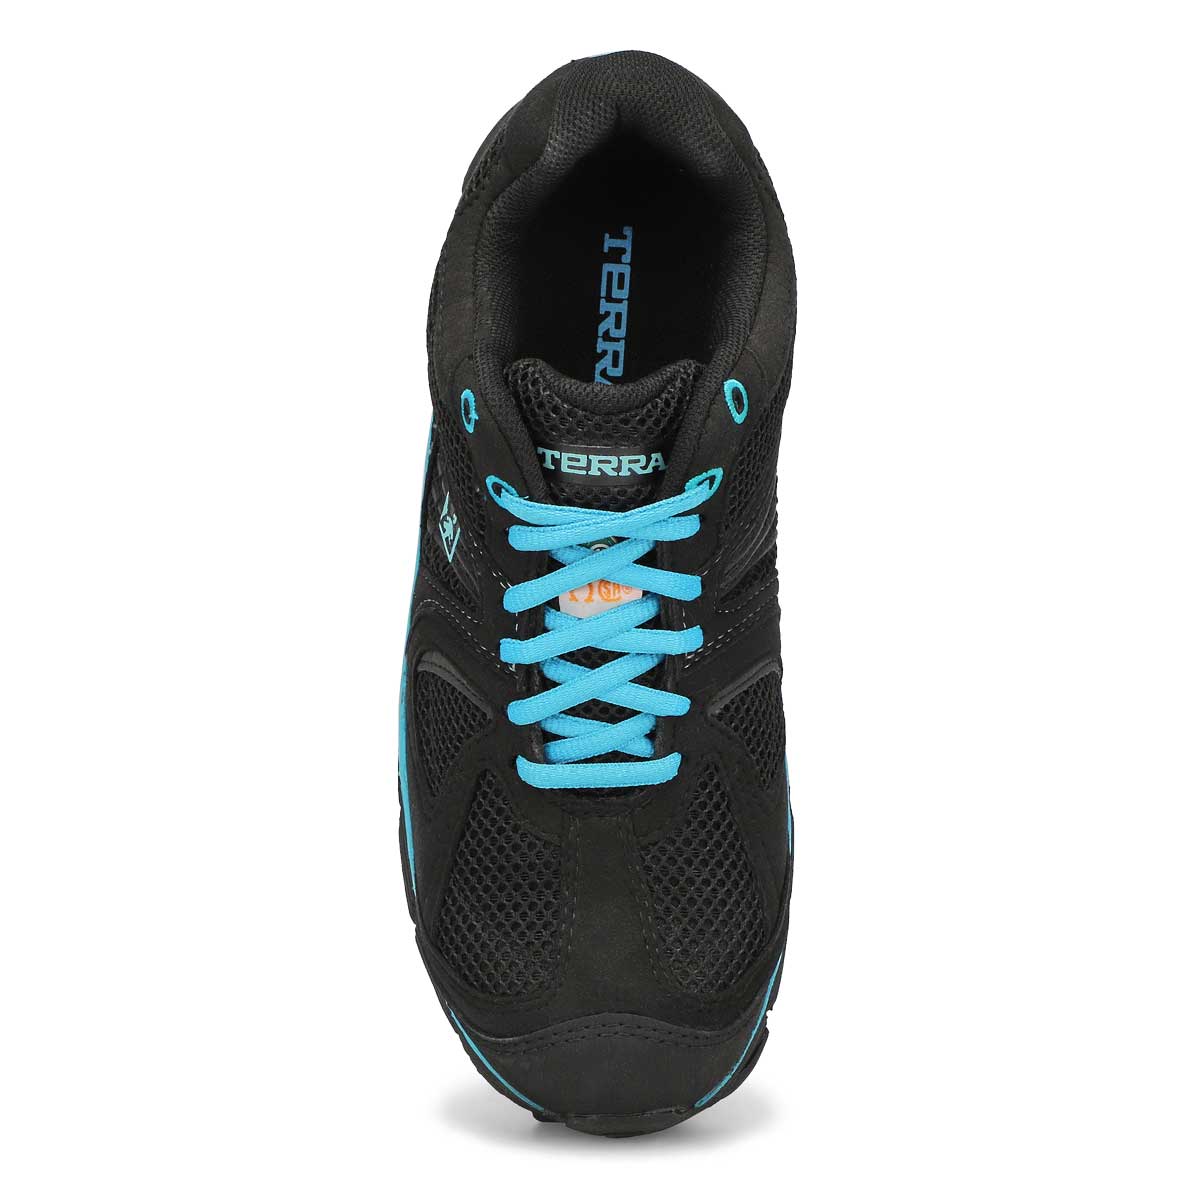 Women's PACER 2 black/blue lace up CSA sneakers